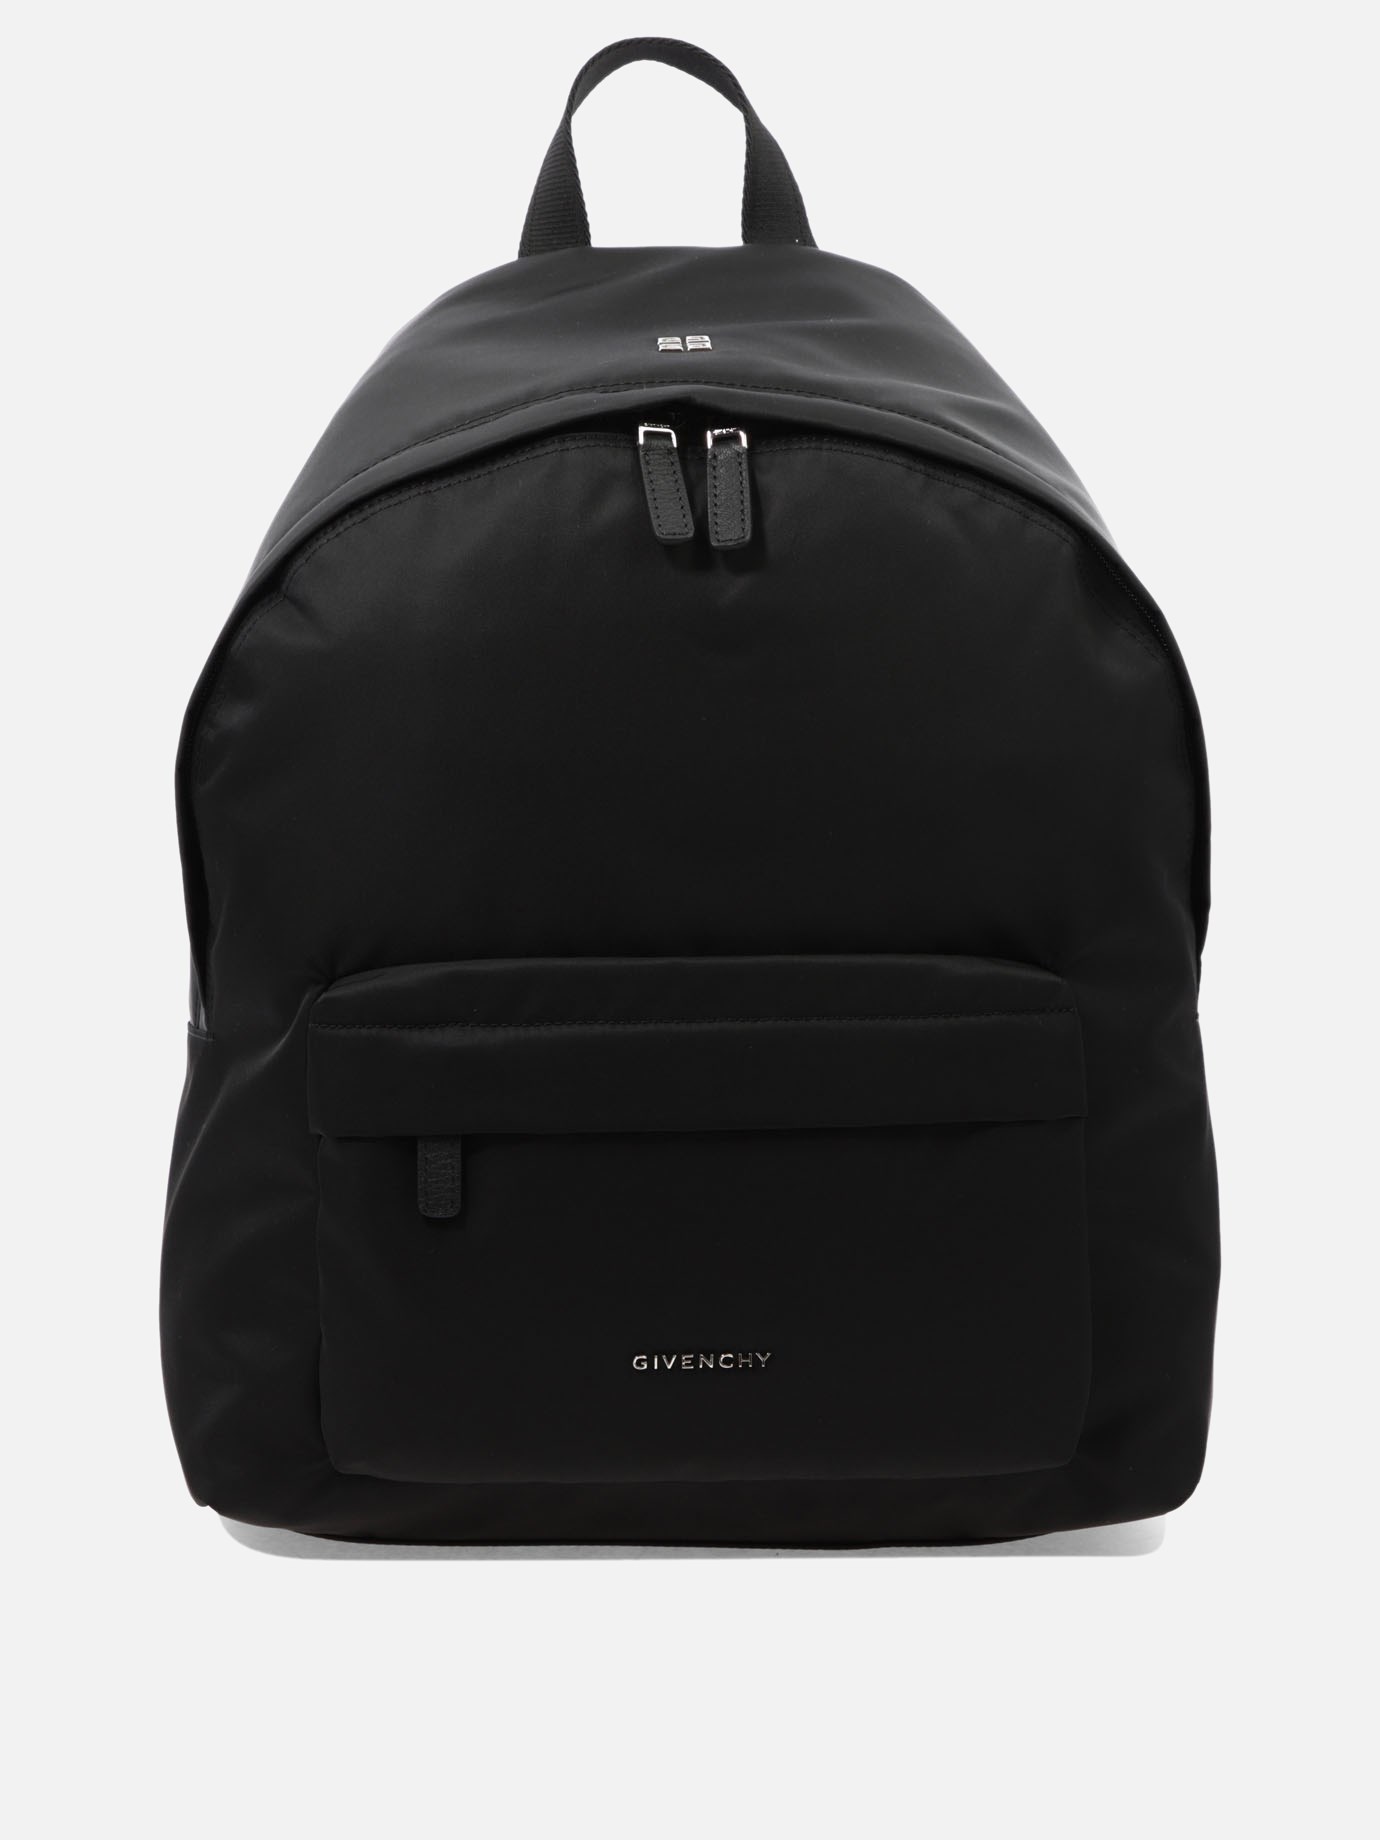  Essential  backpackby Givenchy - 5